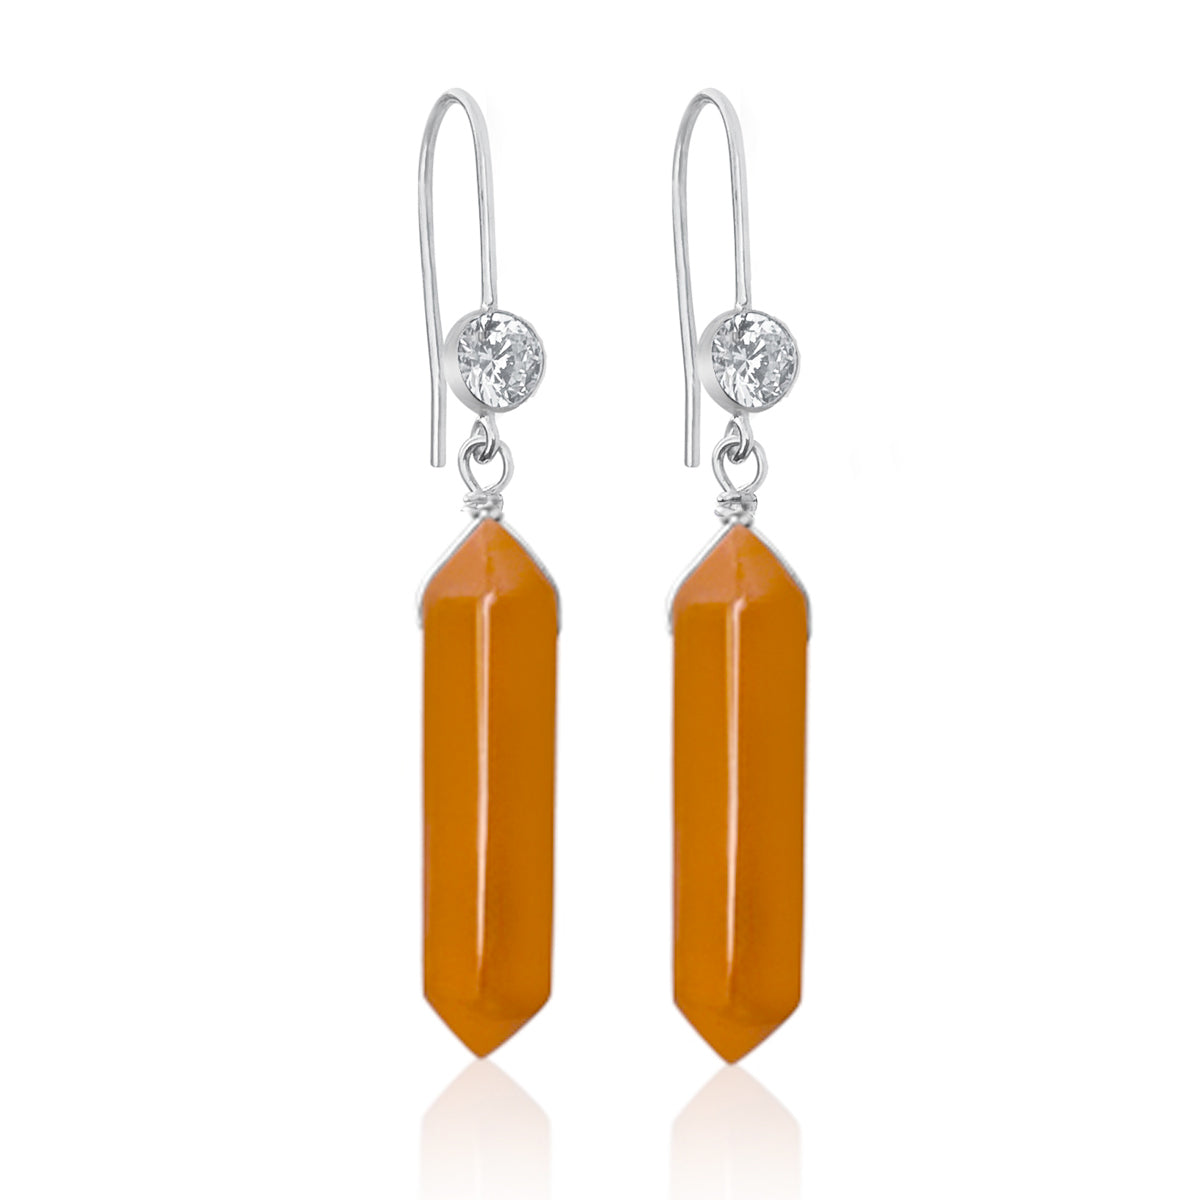 The Orange Blossom Aventurine Earrings are a stunning pair of earrings that feature two polished orange Aventurine stones. Aventurine is a soothing and calming stone that promotes emotional balance, creativity, and abundance. 